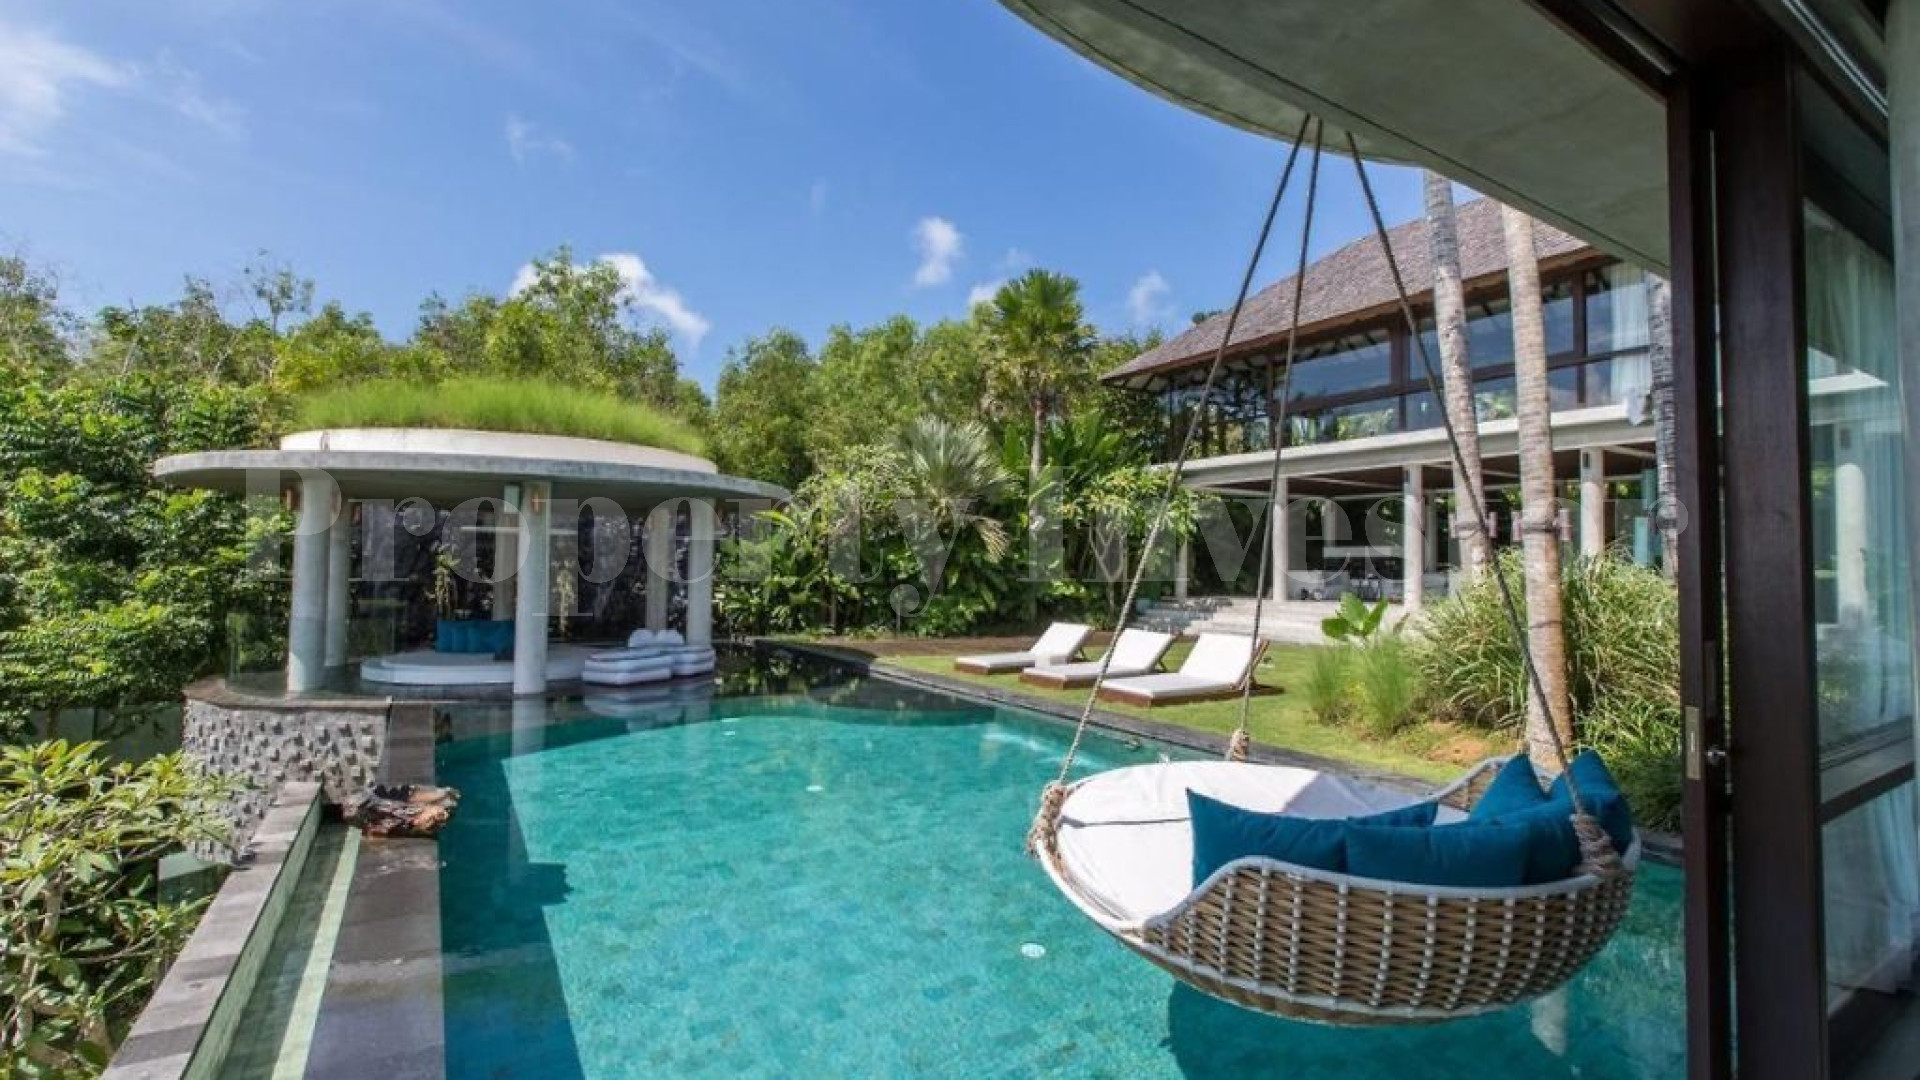 Impressive 4 Bedroom Contemporary Luxury Villa with Spectacular Valley Views for Sale in Uluwatu, Bali